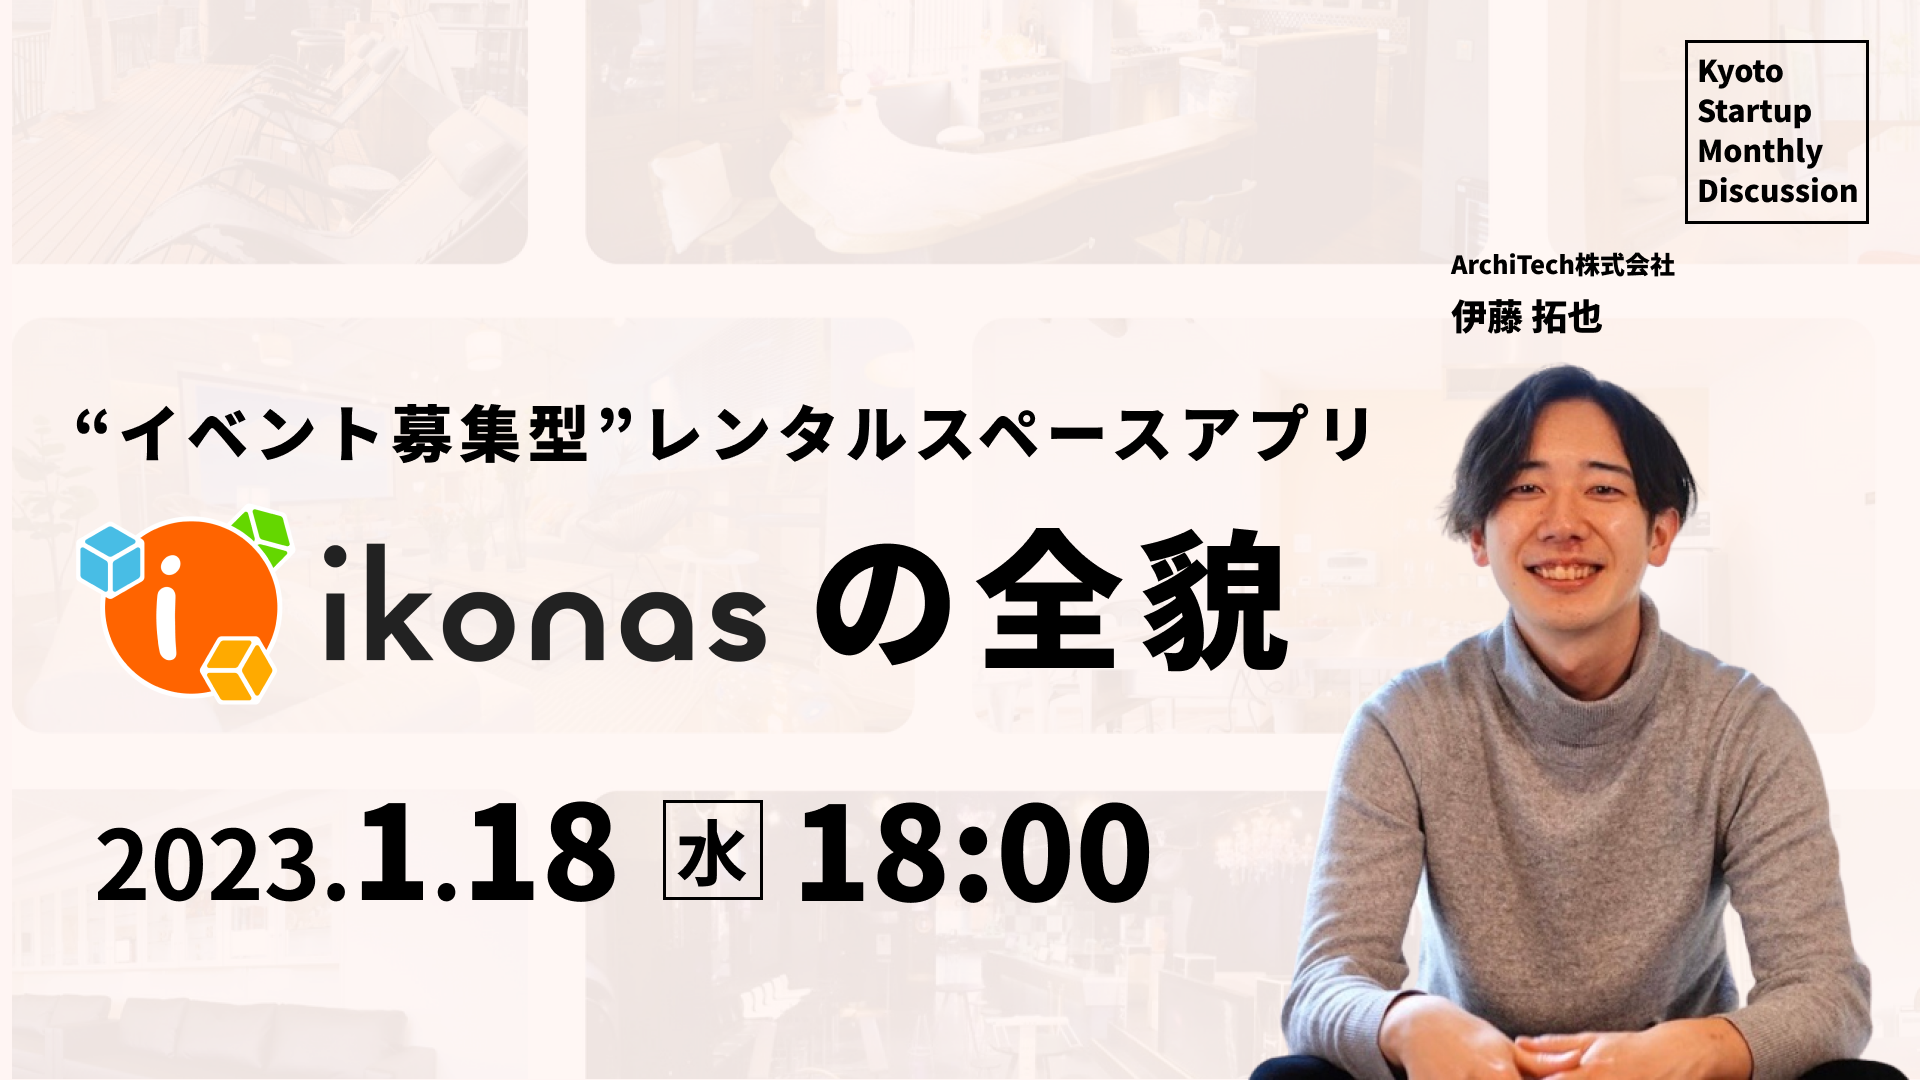 Kyoto Startup Monthly Discussion #20